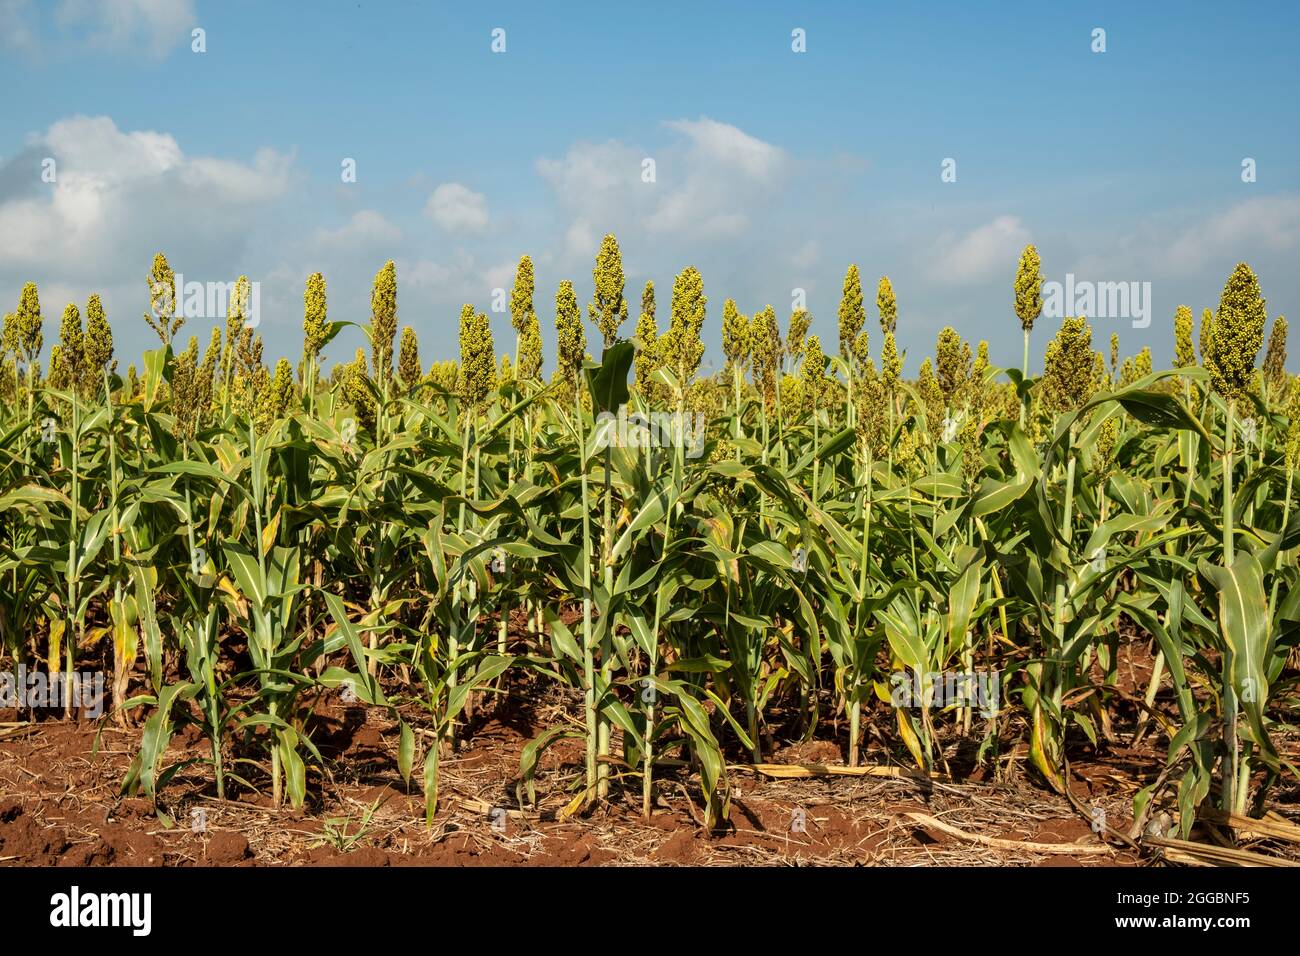 Sorghum plantation on a sunny day in Brazil. Stock Photo